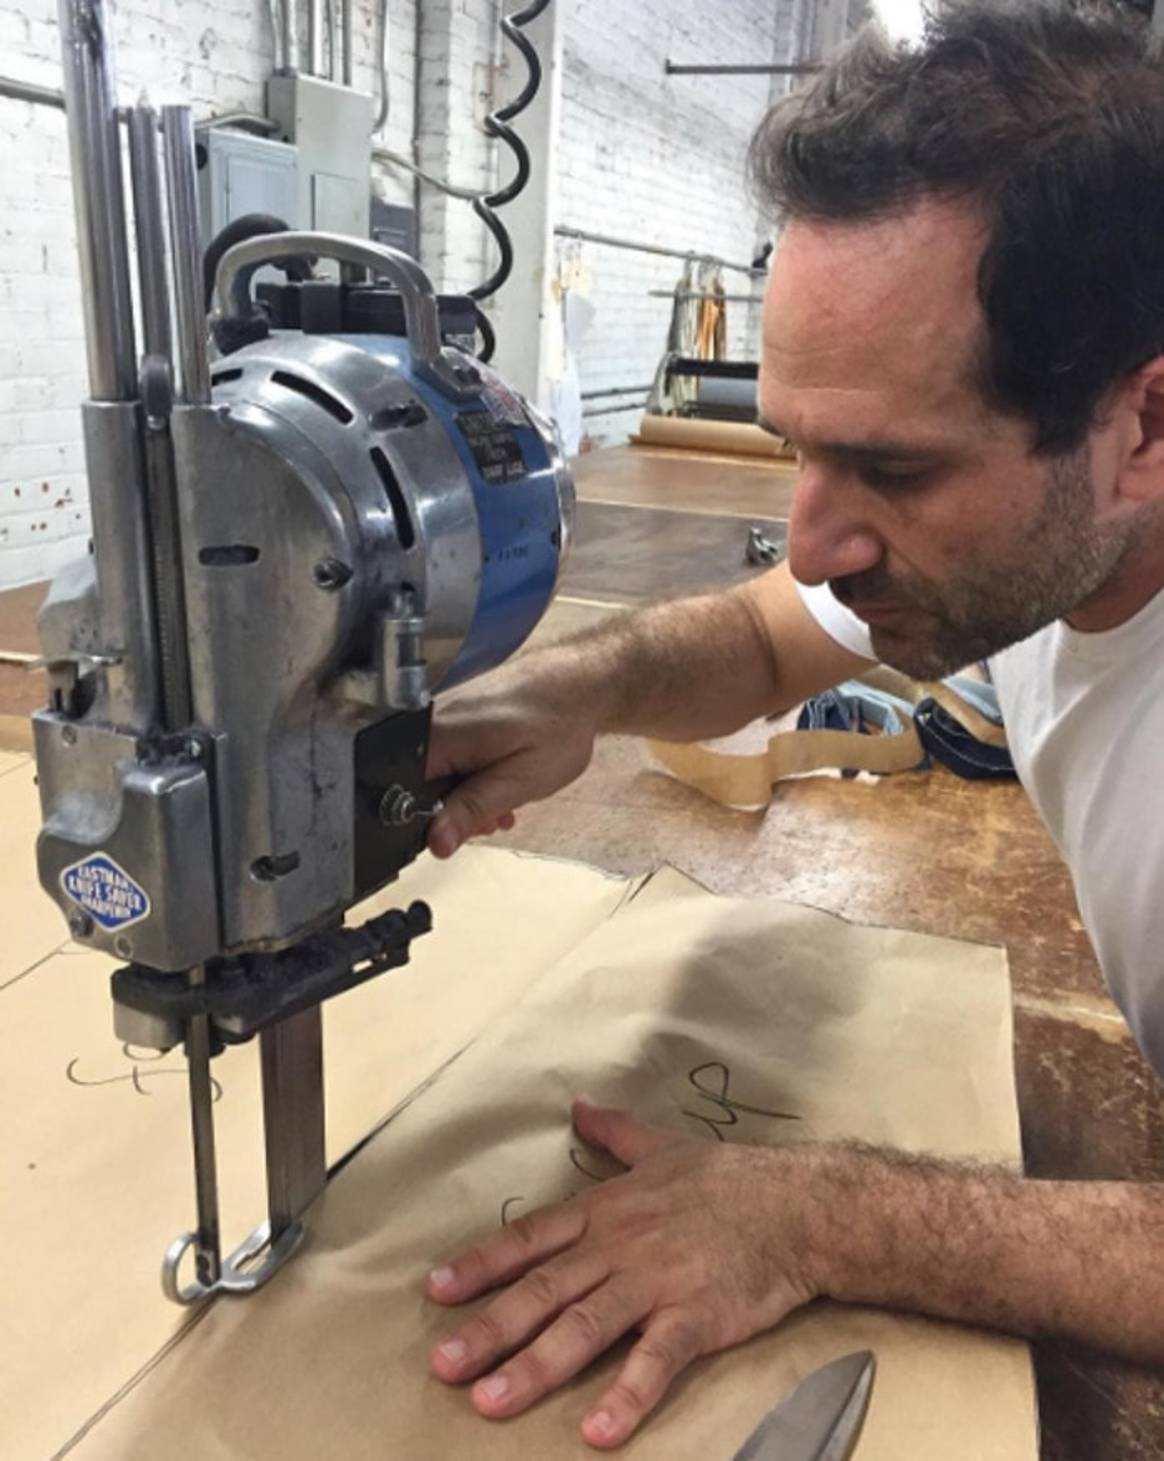 Dov Charney starts anew with innovative apparel company